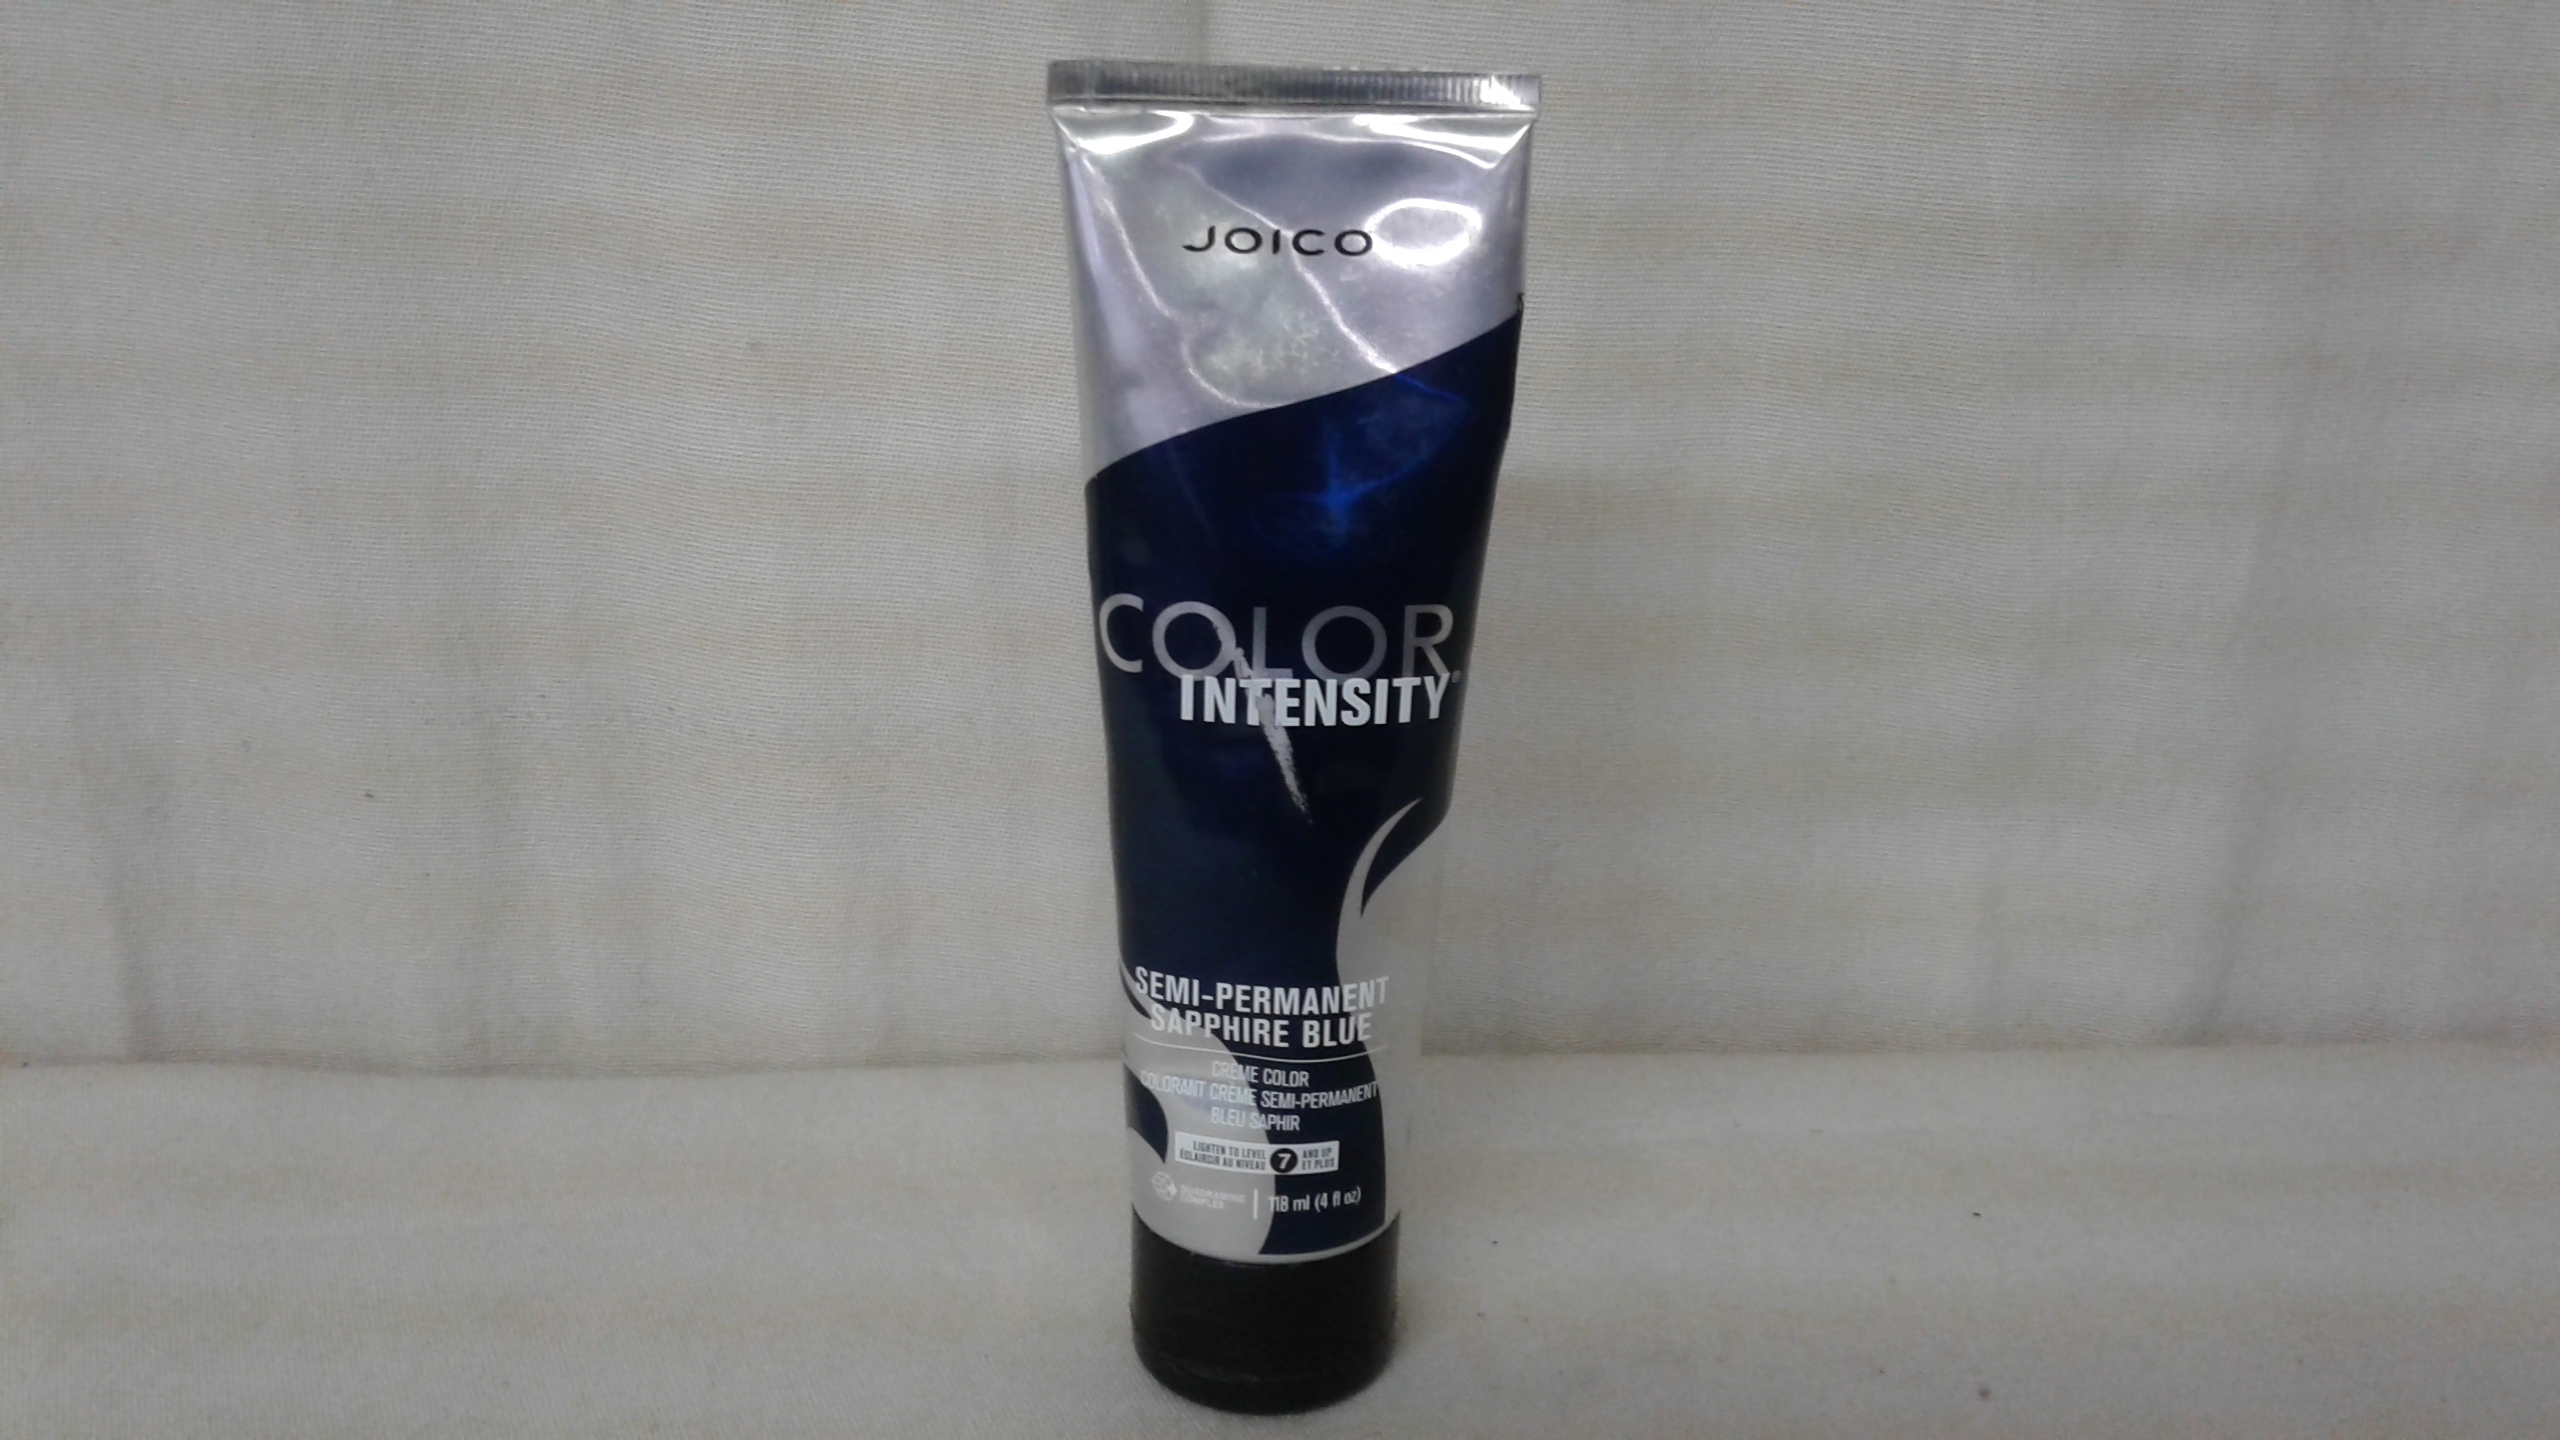 4. Joico Intensity Semi-Permanent Hair Color in Sapphire Blue - wide 3